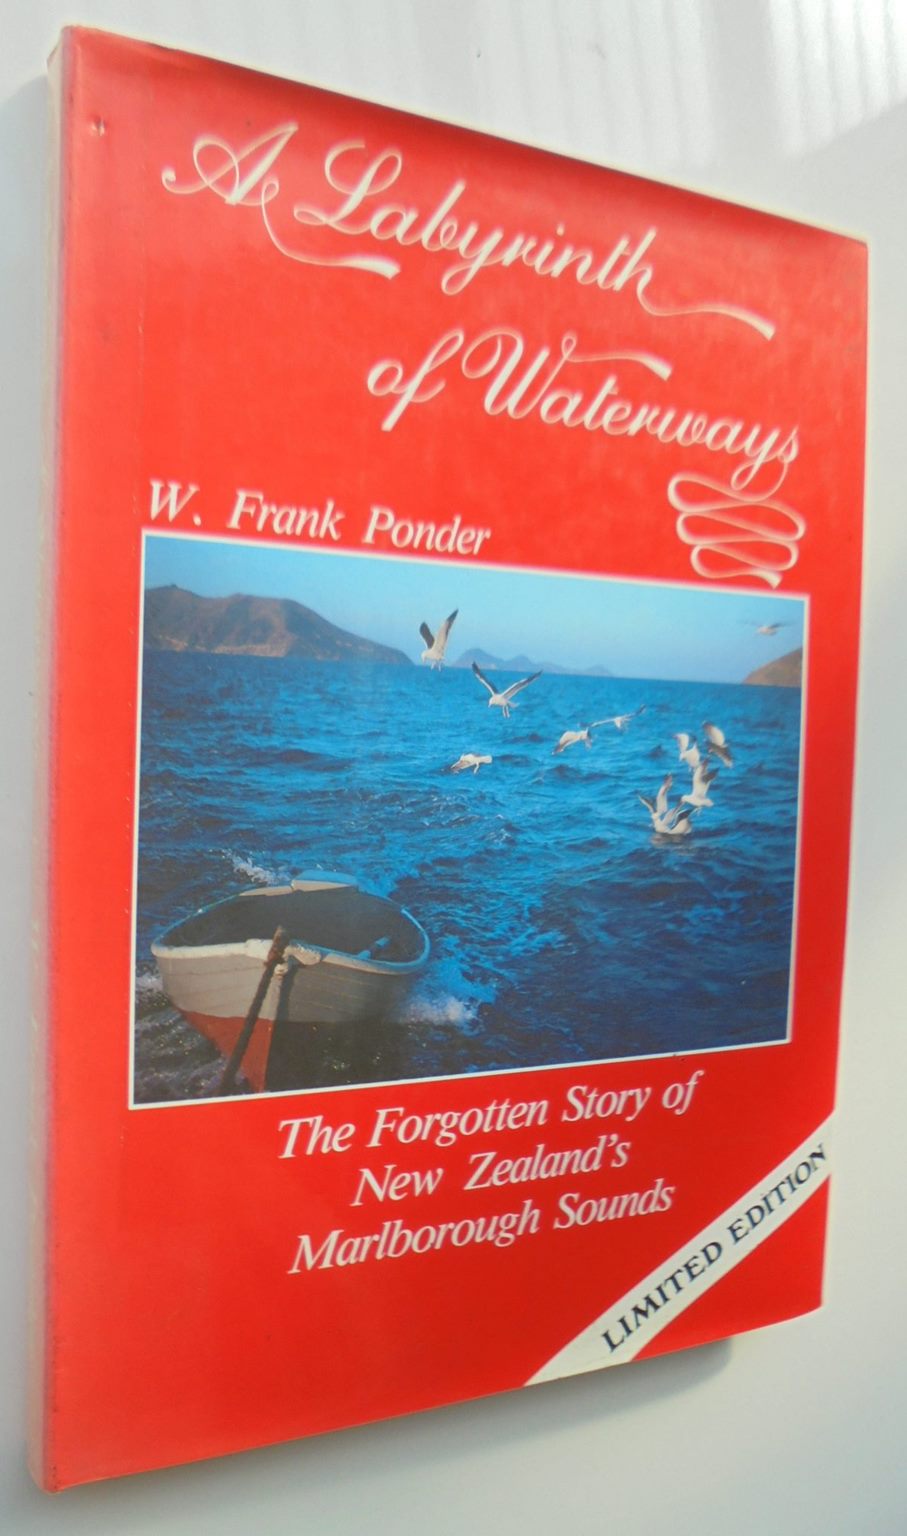 A Labyrinth of Waterways. The Forgotten Story of New Zealands Marlborough Sounds. by W. Frank Ponder. SIGNED BY AUTHOR.